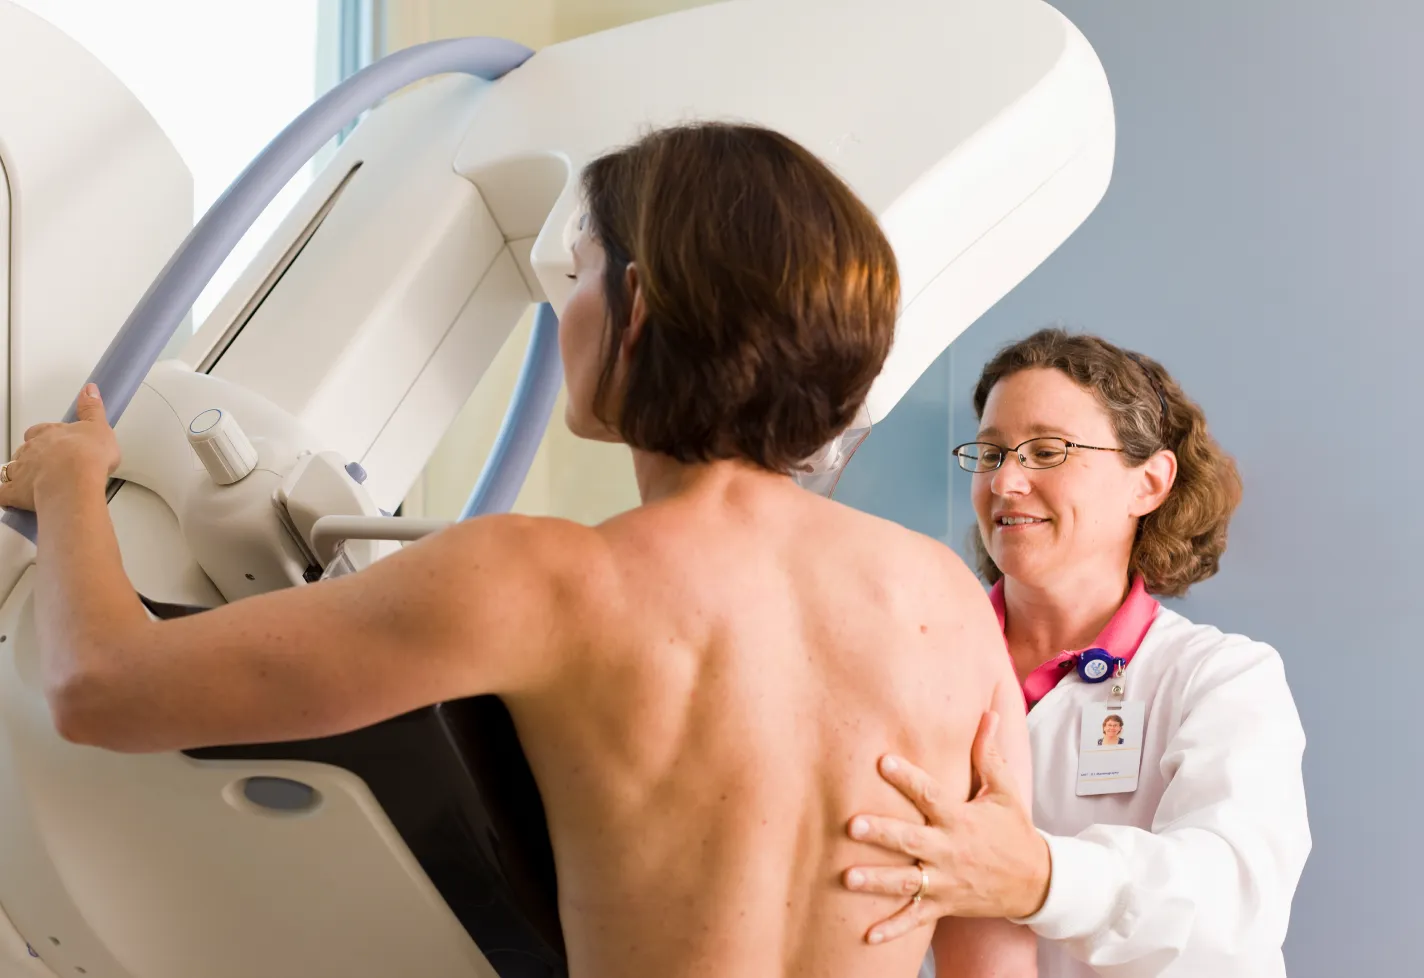 A health care provider is assisting and positioning a woman for a mammogram scan. 